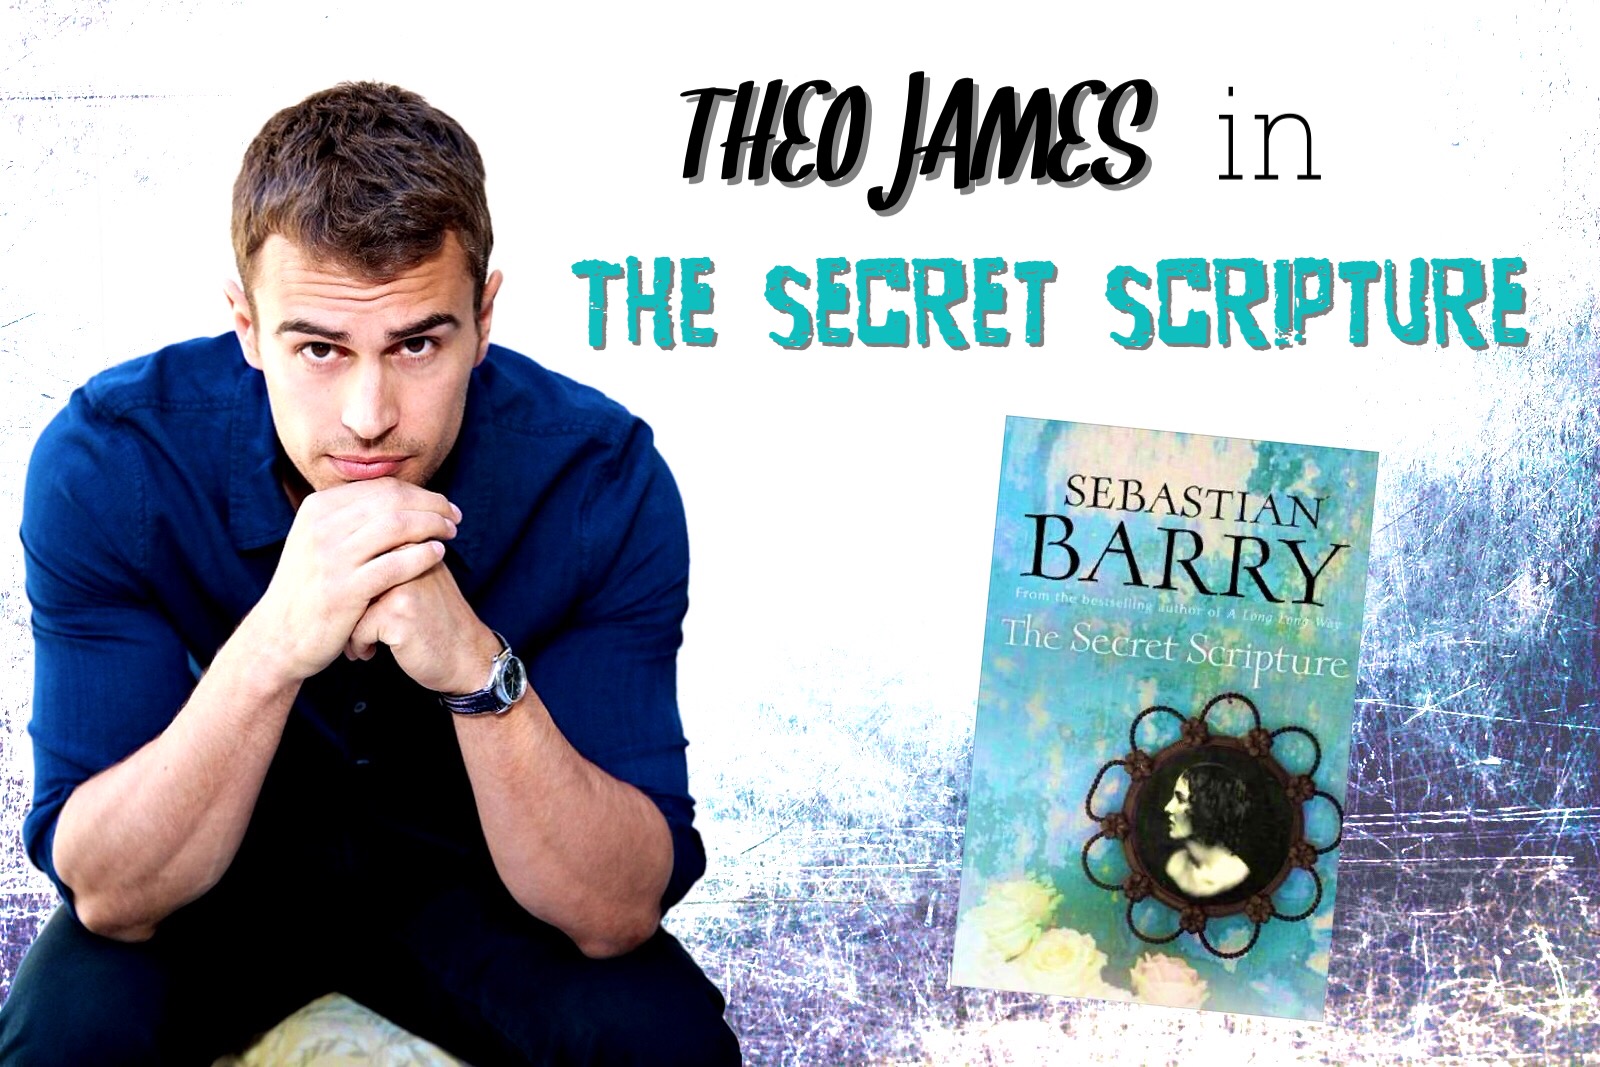 5 Things You Probably Didn’t Know About ‘The Secret Scripture’ With Theo James